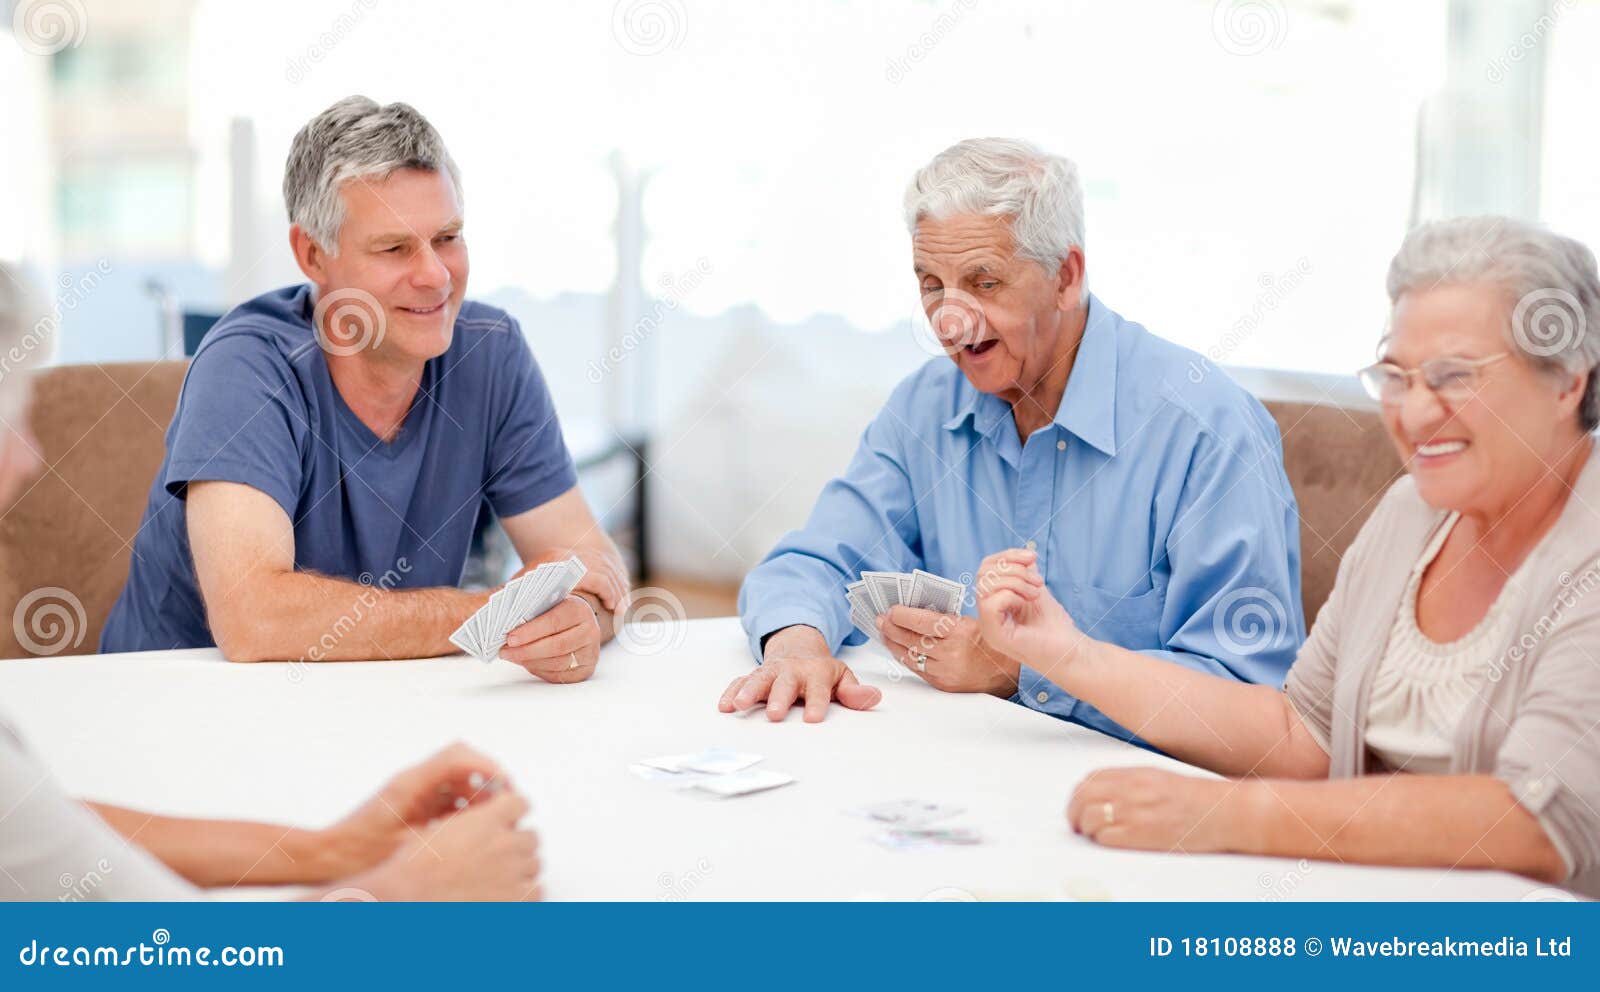 Retired People Playing Cards Together Stock Photo - Image of home ...